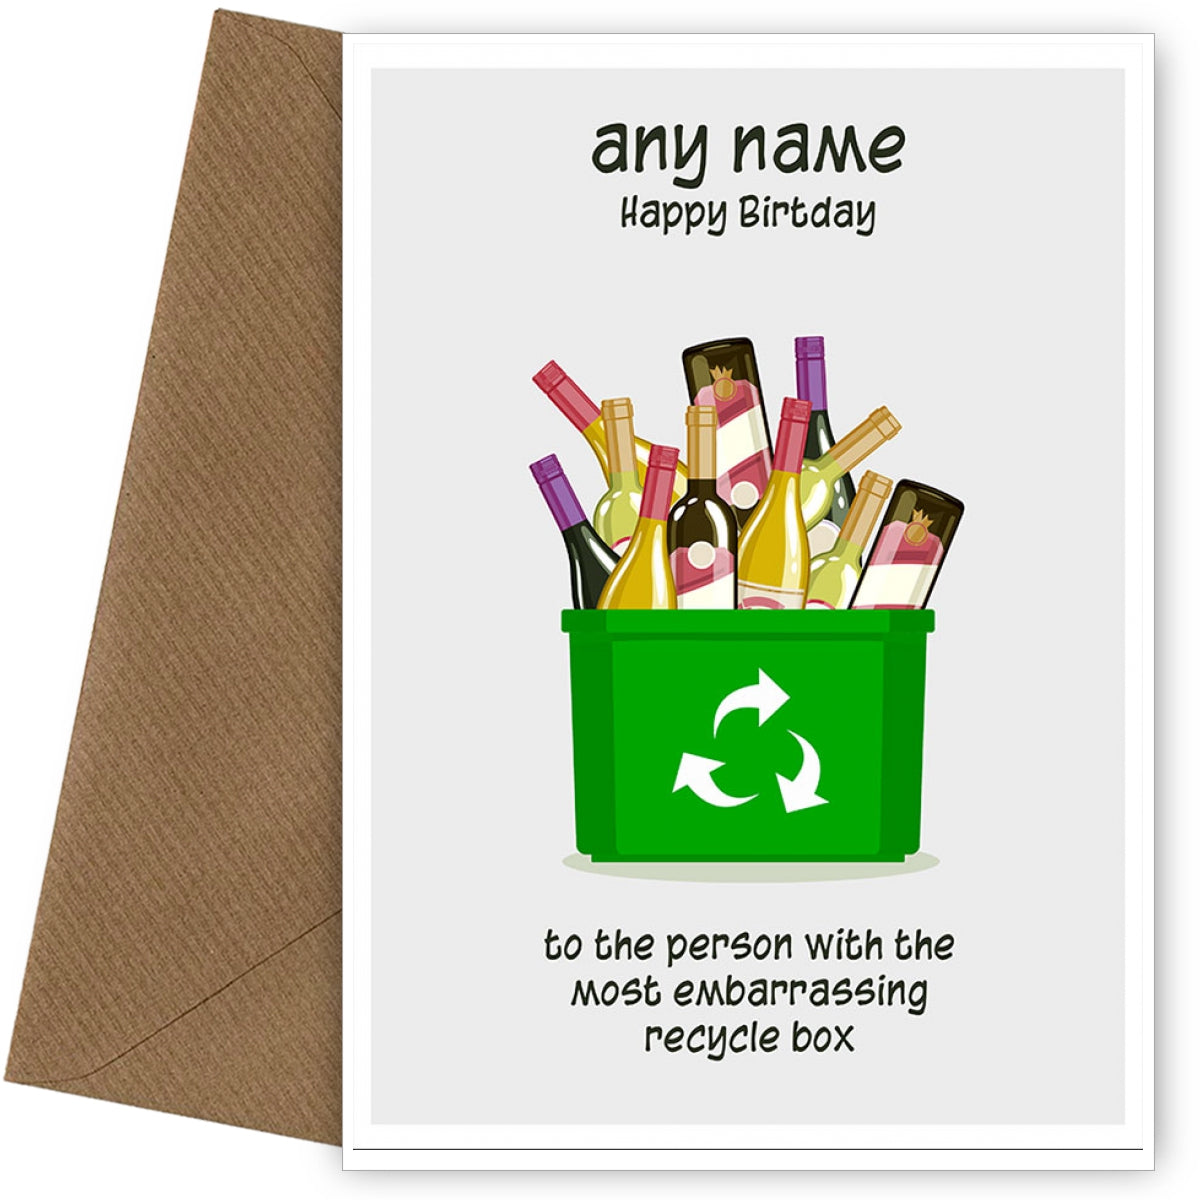 Funny Birthday Card - Embarrassing Recycle Box